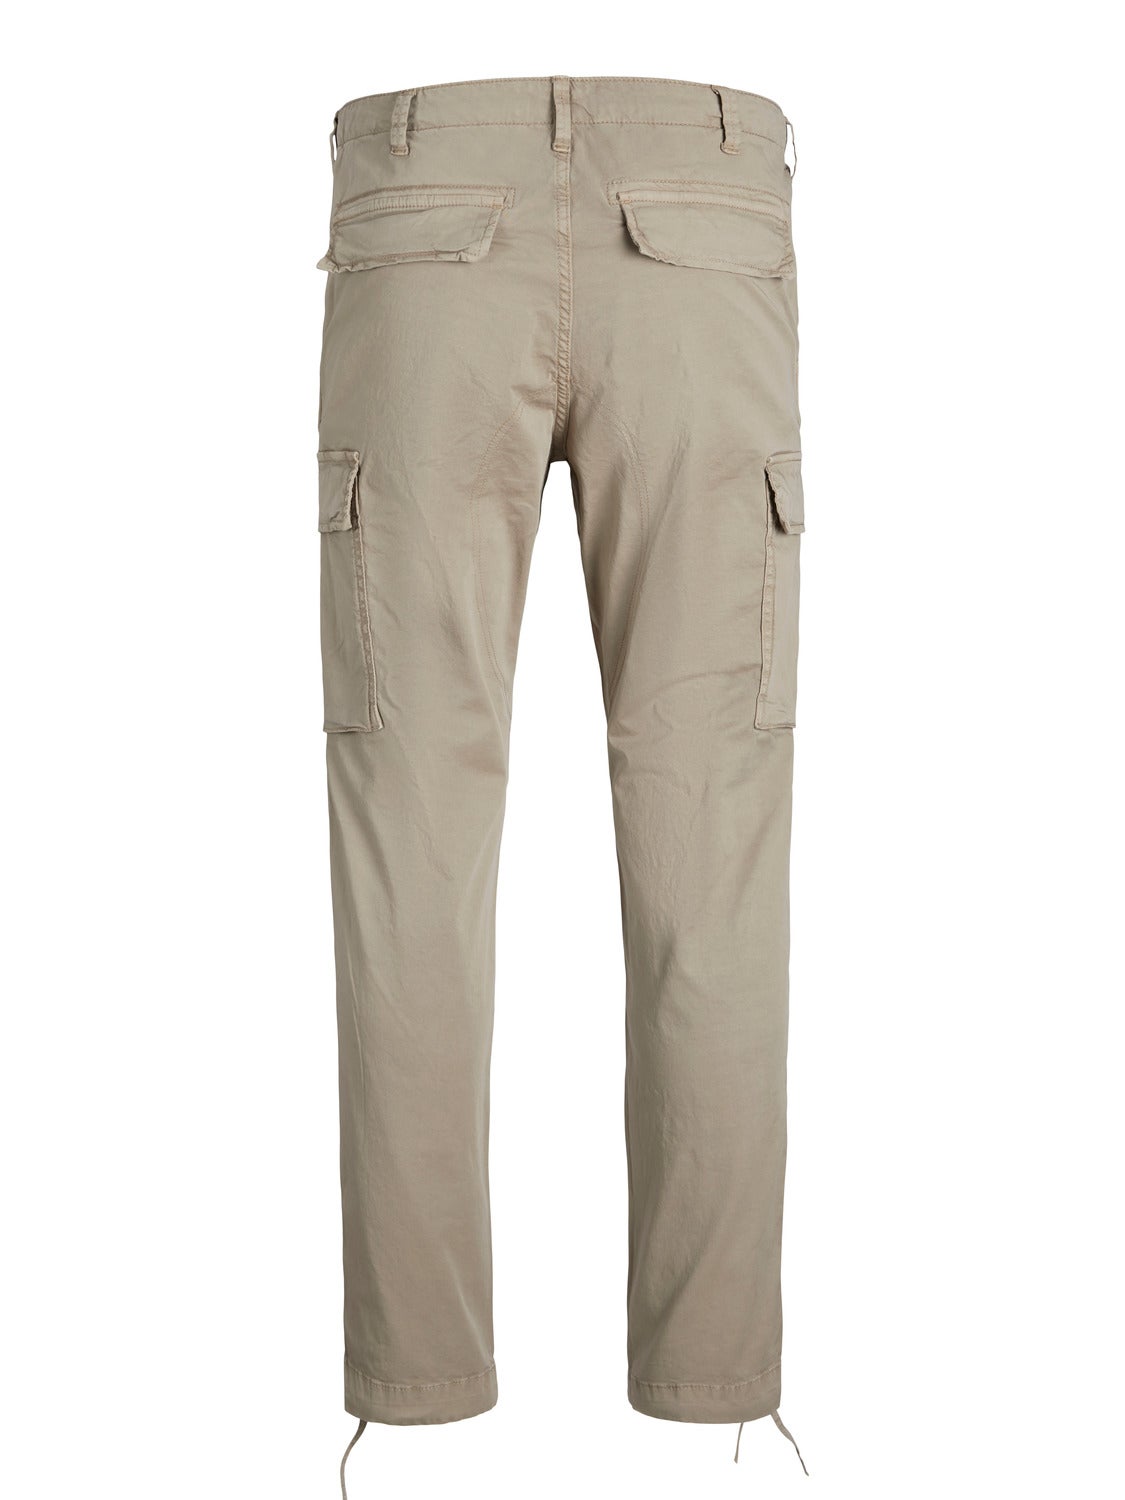 Men's Orvis Sporting Tradition Cargo Pants Beige Cotton Size 36 RN70534